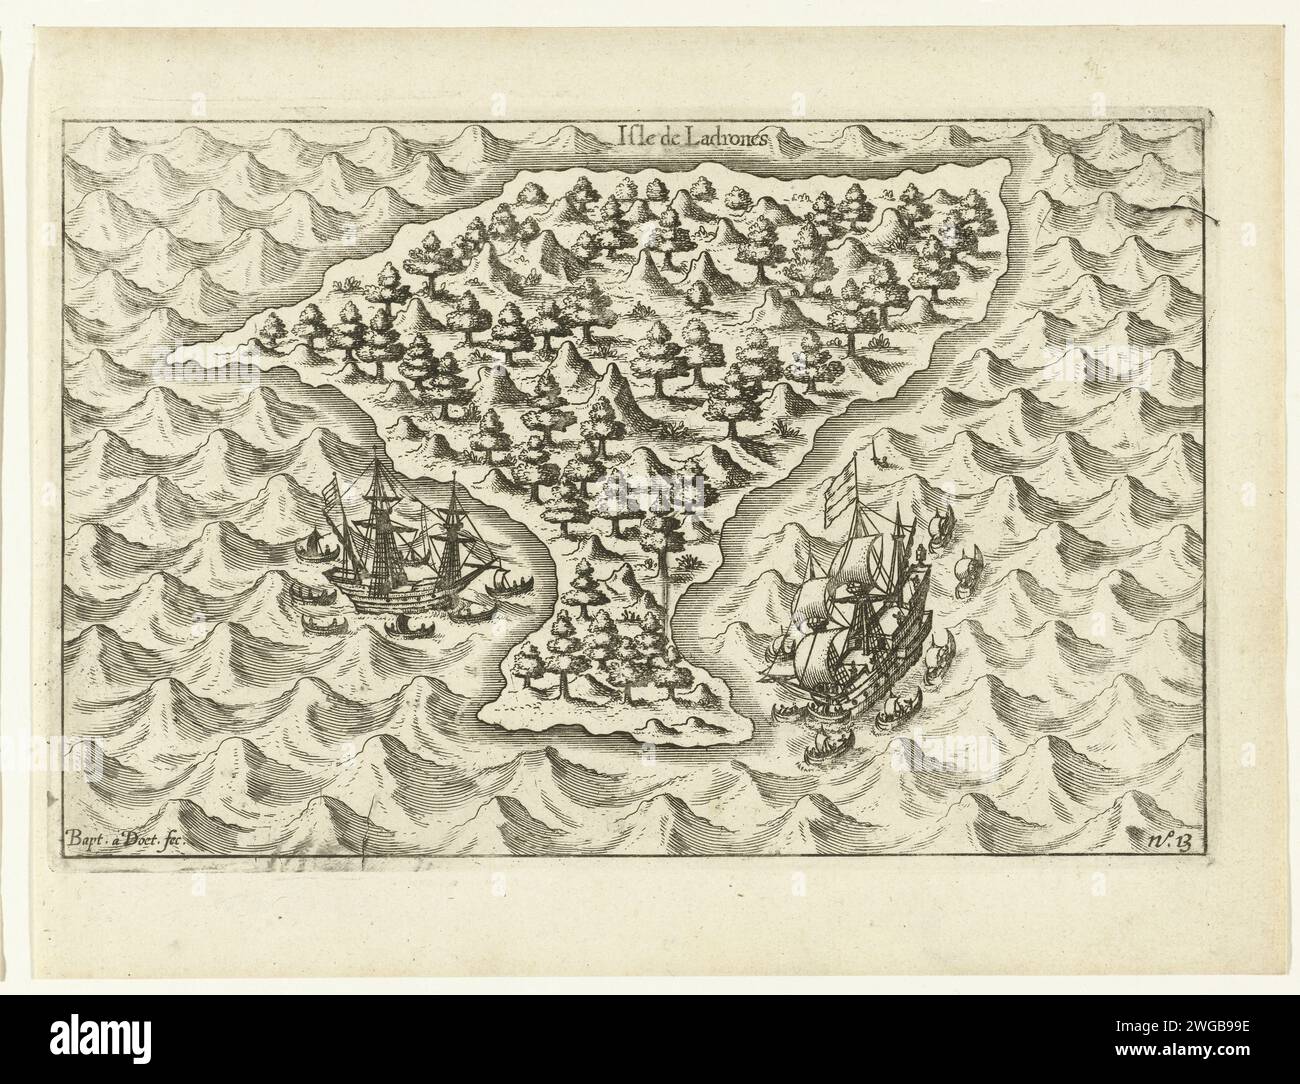 The two ships at one of the Ladrones or Mariana Islands, 1600, 1646 print The two ships at one of the Ladrones or Mariana Islands, September 15, 1600. Part of the illustrations in the report of the journey around the world by Olivier van Noort in 1598-1601. No. 13. Northern Netherlands paper etching / engraving exploration, expedition, voyage of discovery. landscapes in tropical and sub-tropical regions. maps of separate countries or regions Mariana Islands Stock Photo